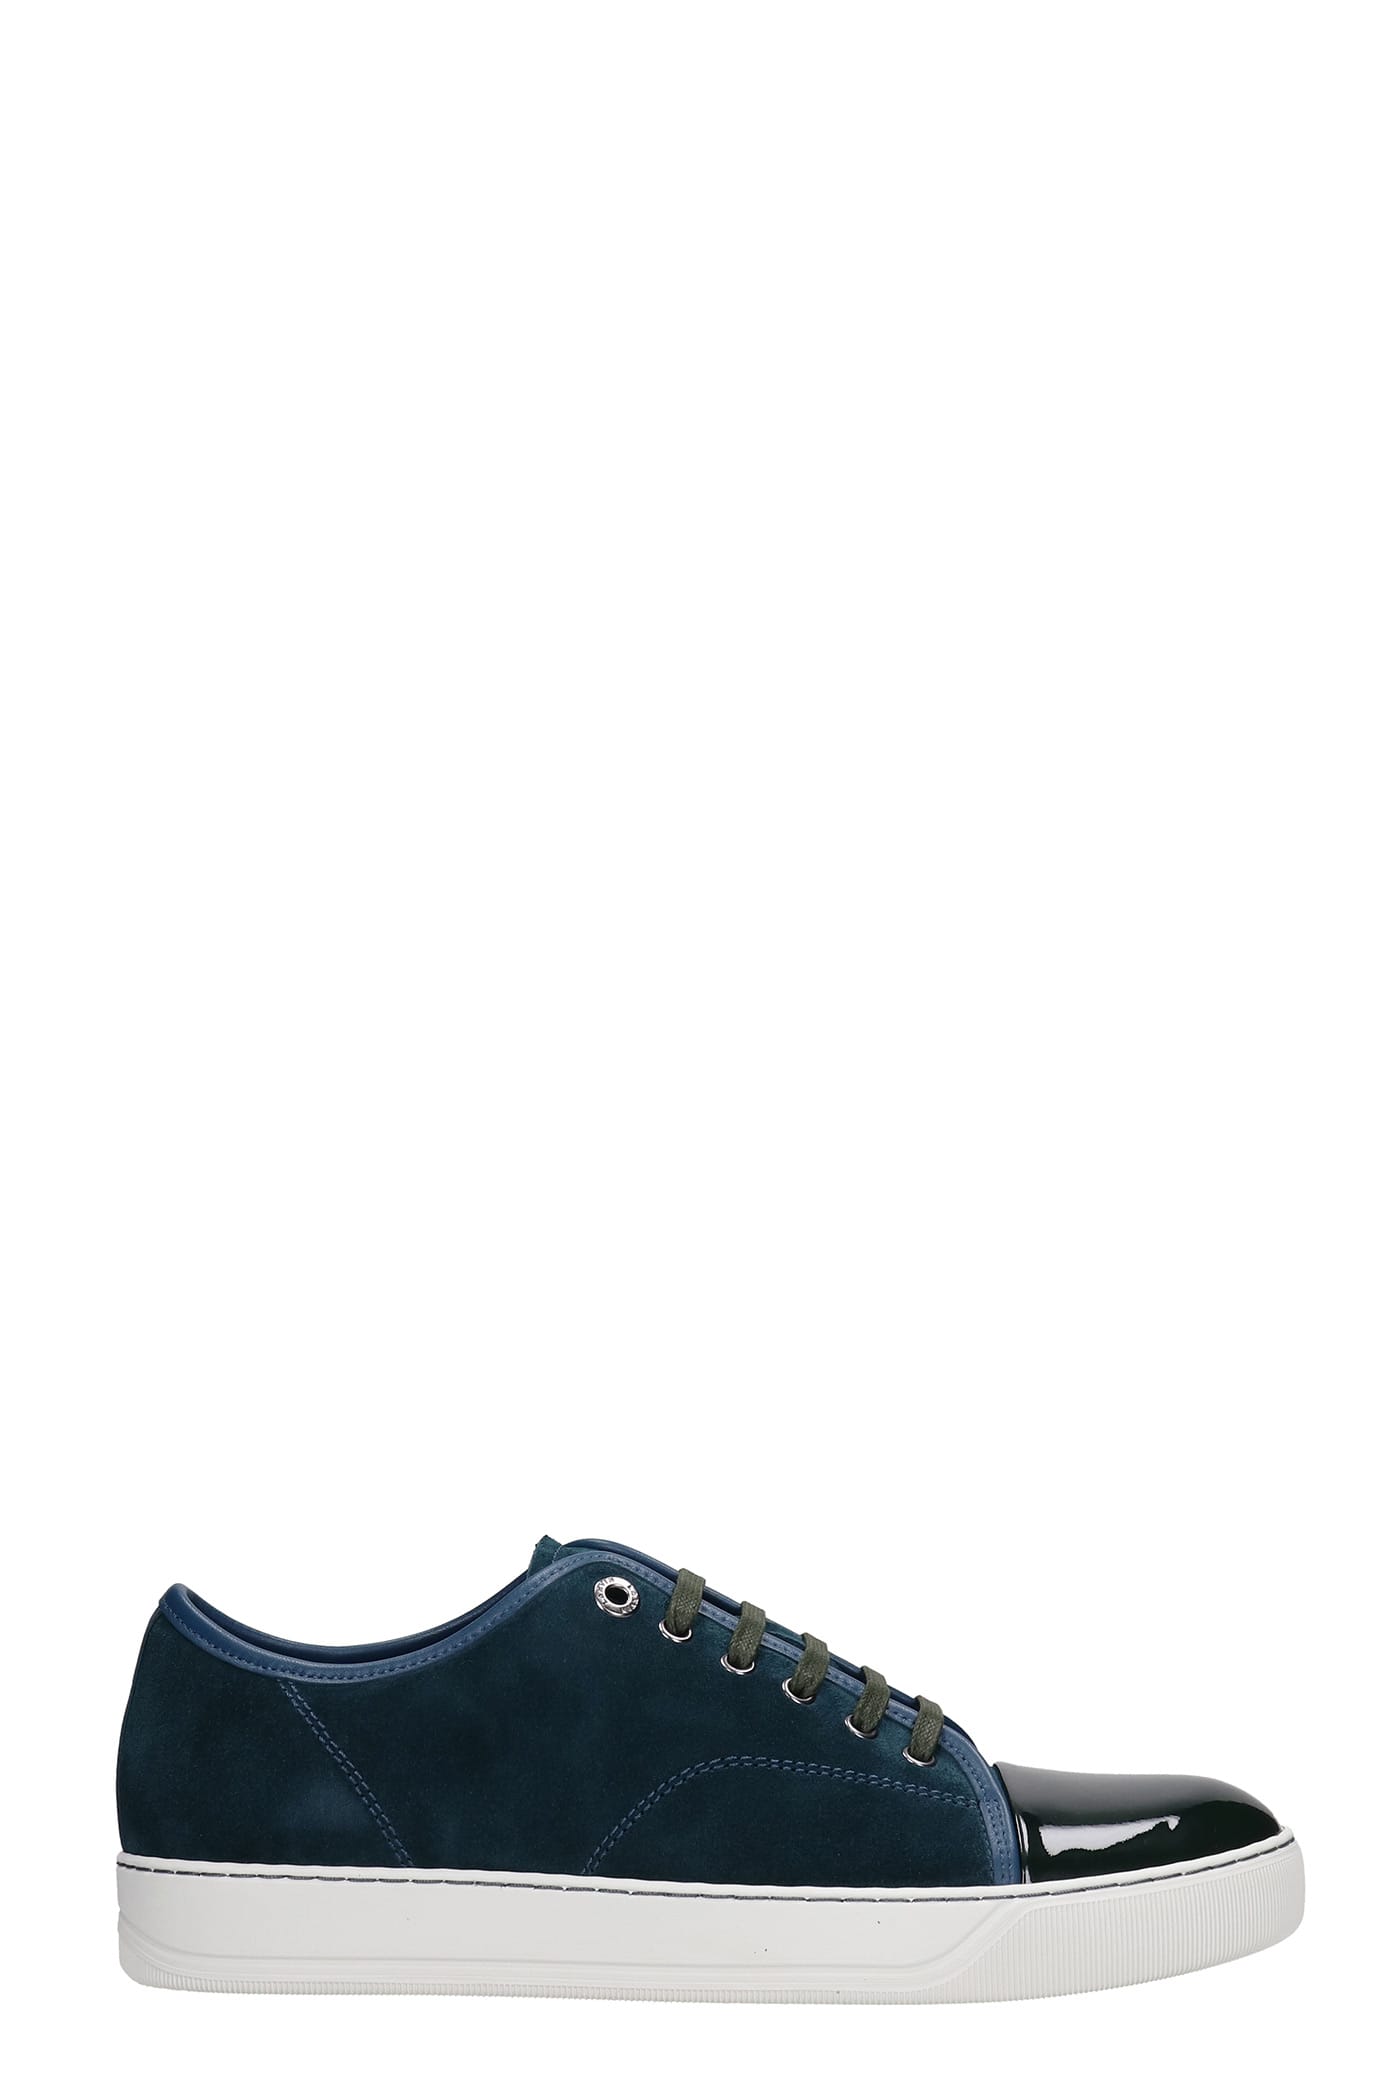 Lanvin Dbb1 Sneakers In Green Suede And Leather